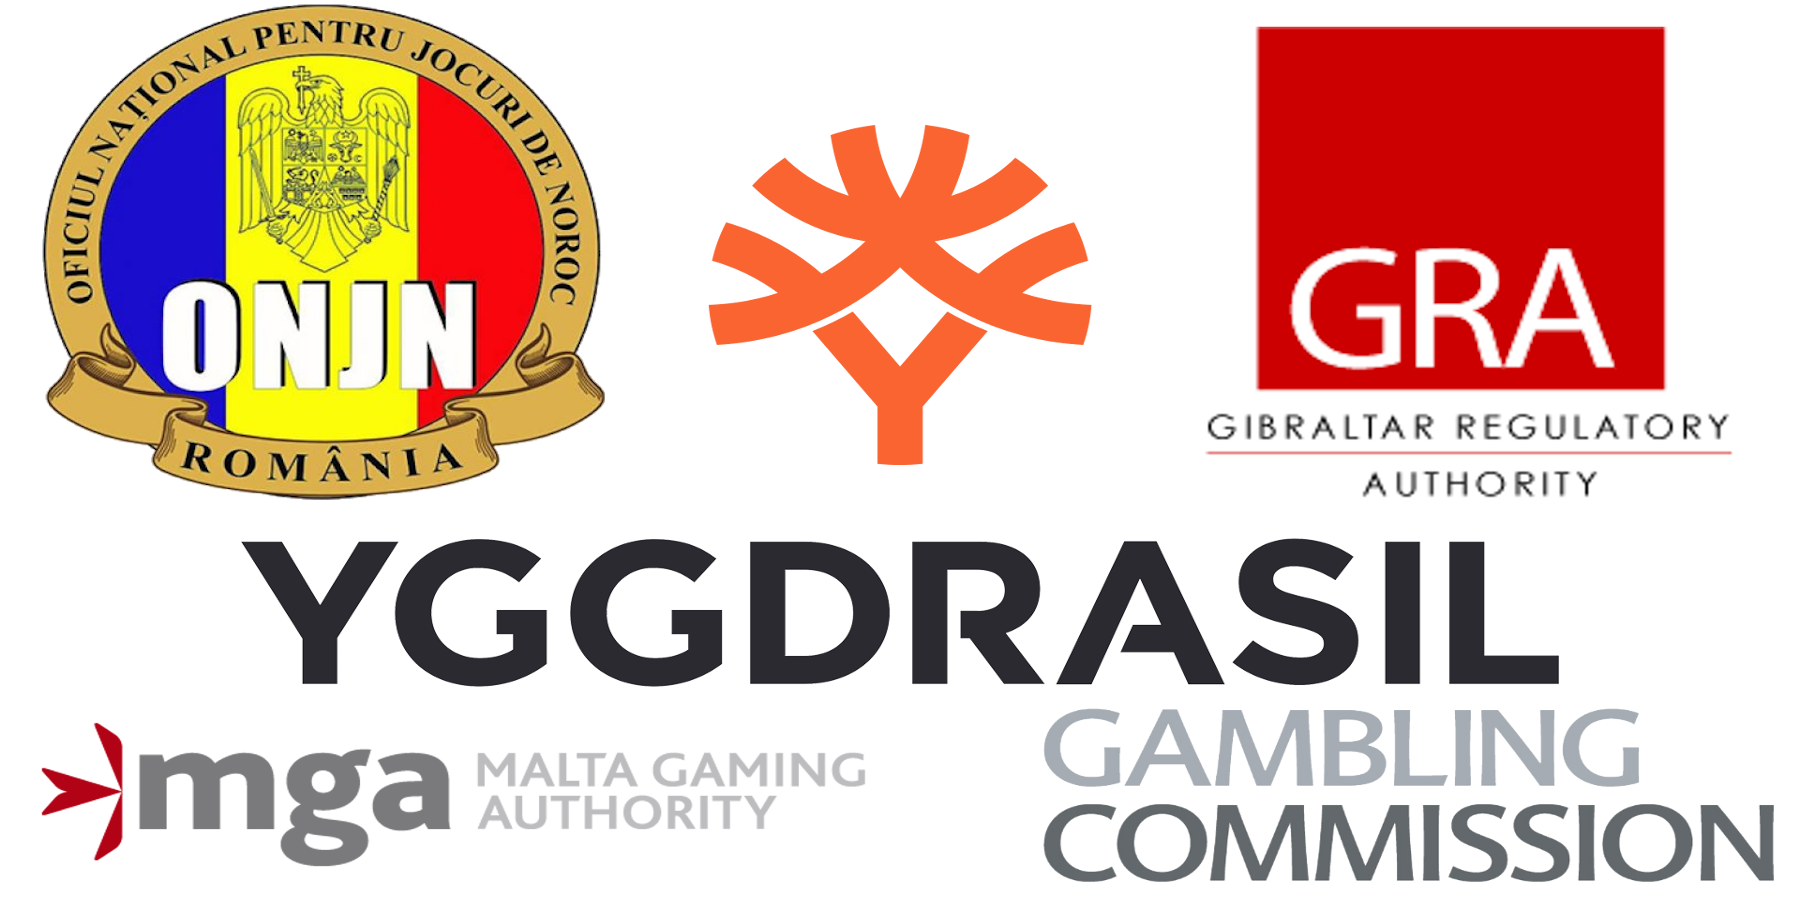 UK Extends Official License For Gambling To Yggdrasil